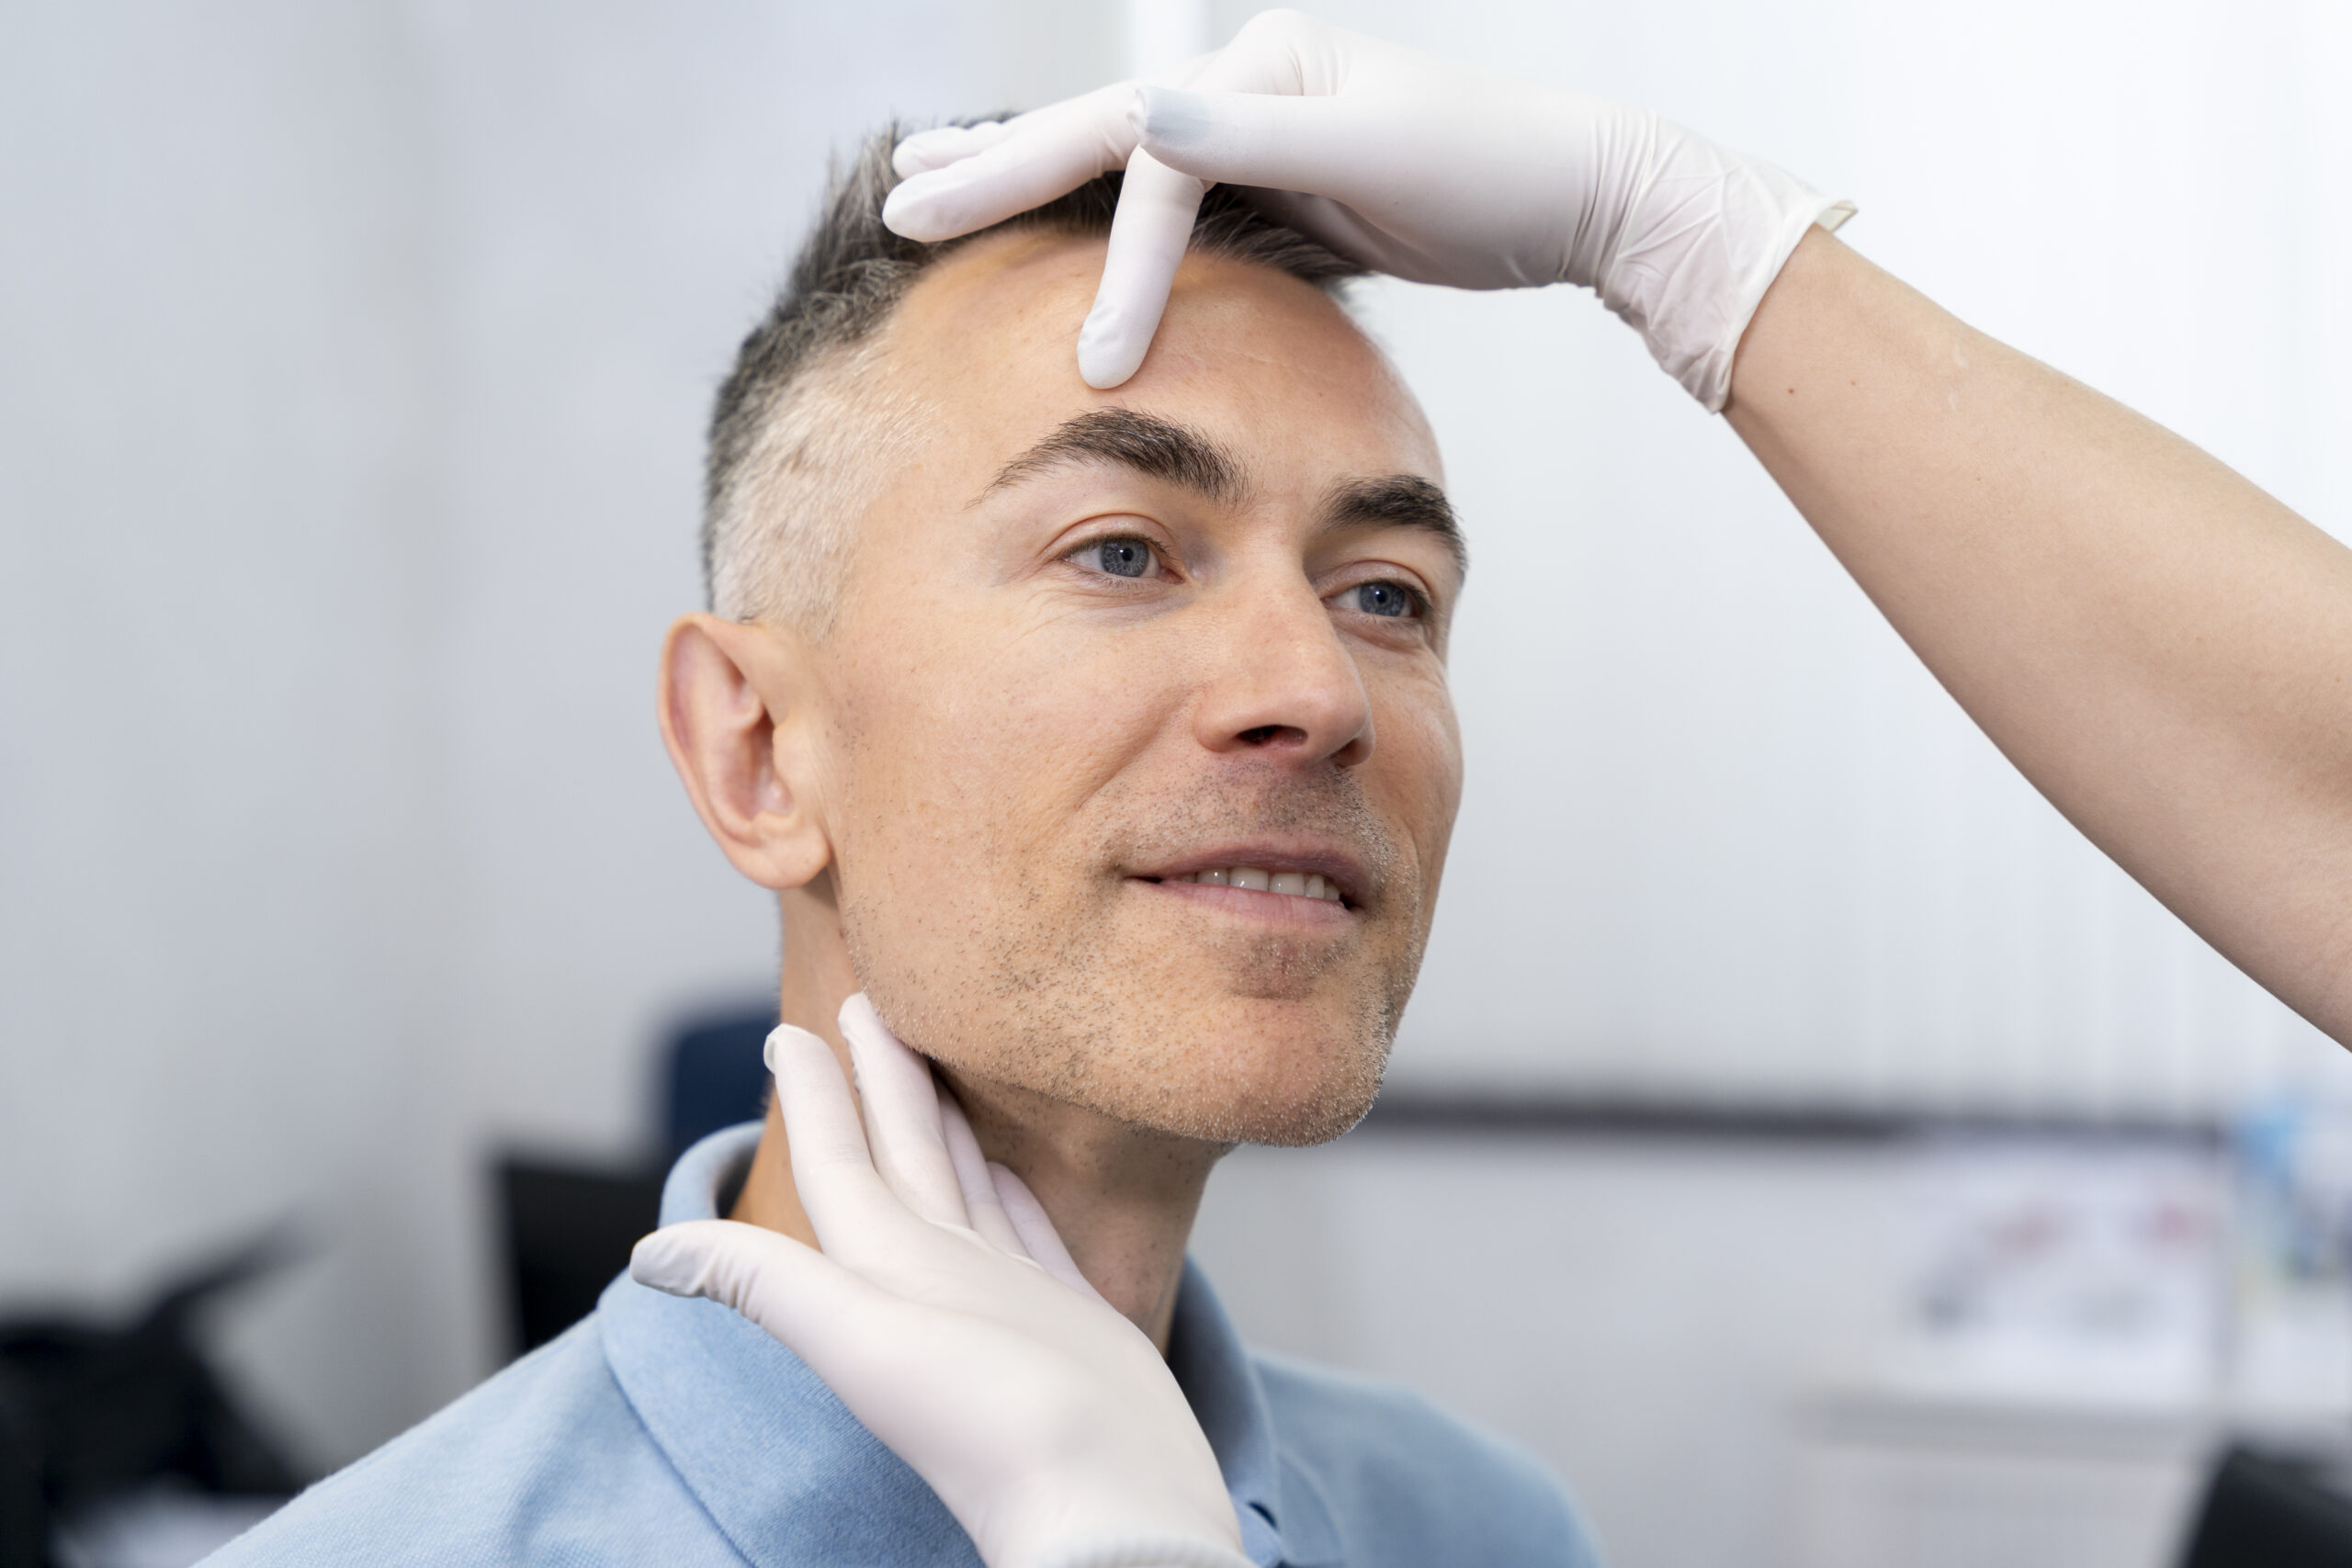 What Is Face Hair Transplant?